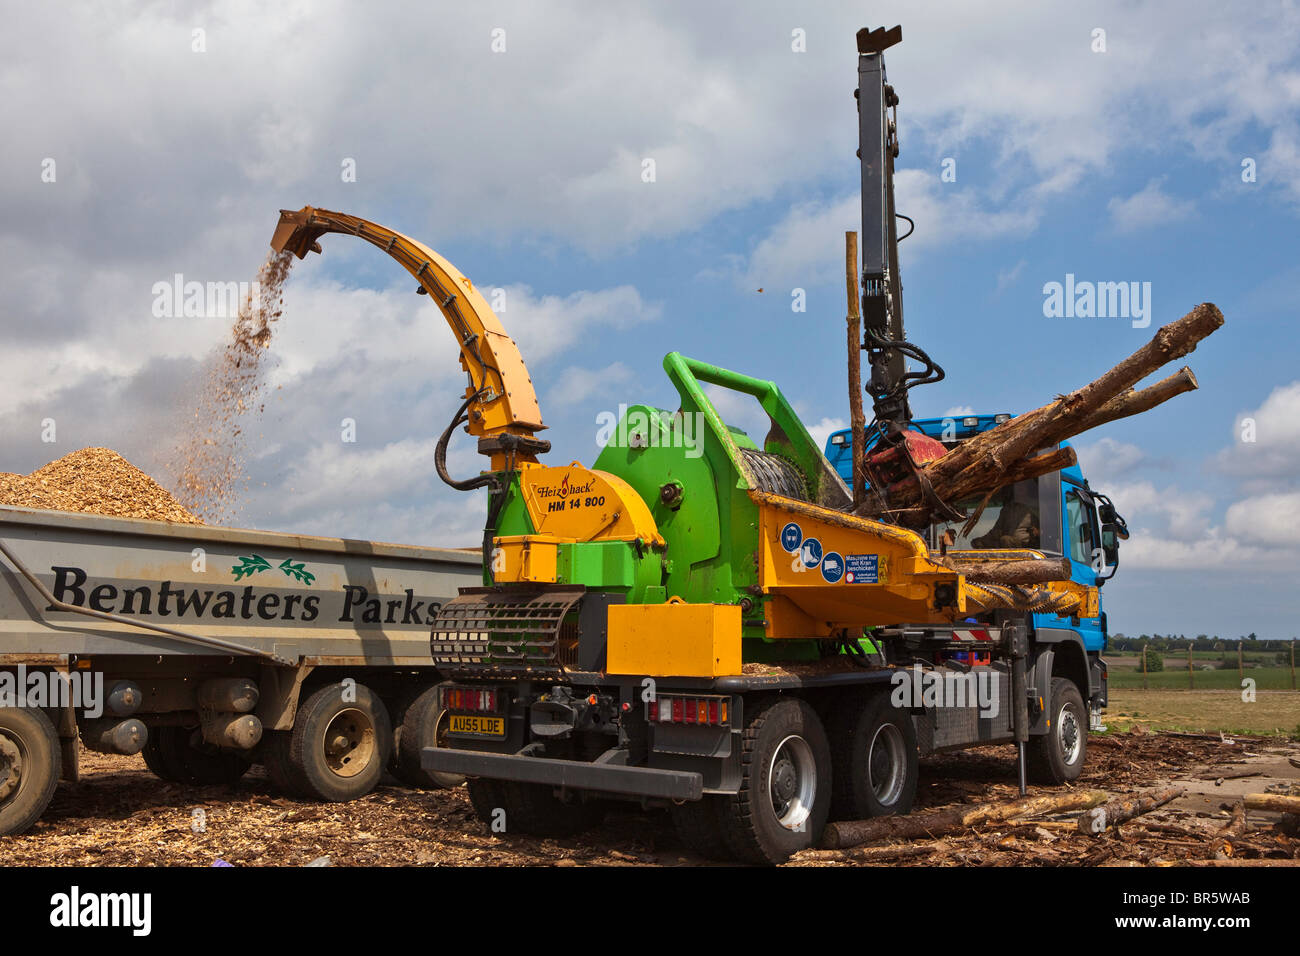 A Heizohack HM 14-800 K lorry mounted wood chipper in action at a wood  storage site in Suffolk, United Kingdom Stock Photo - Alamy